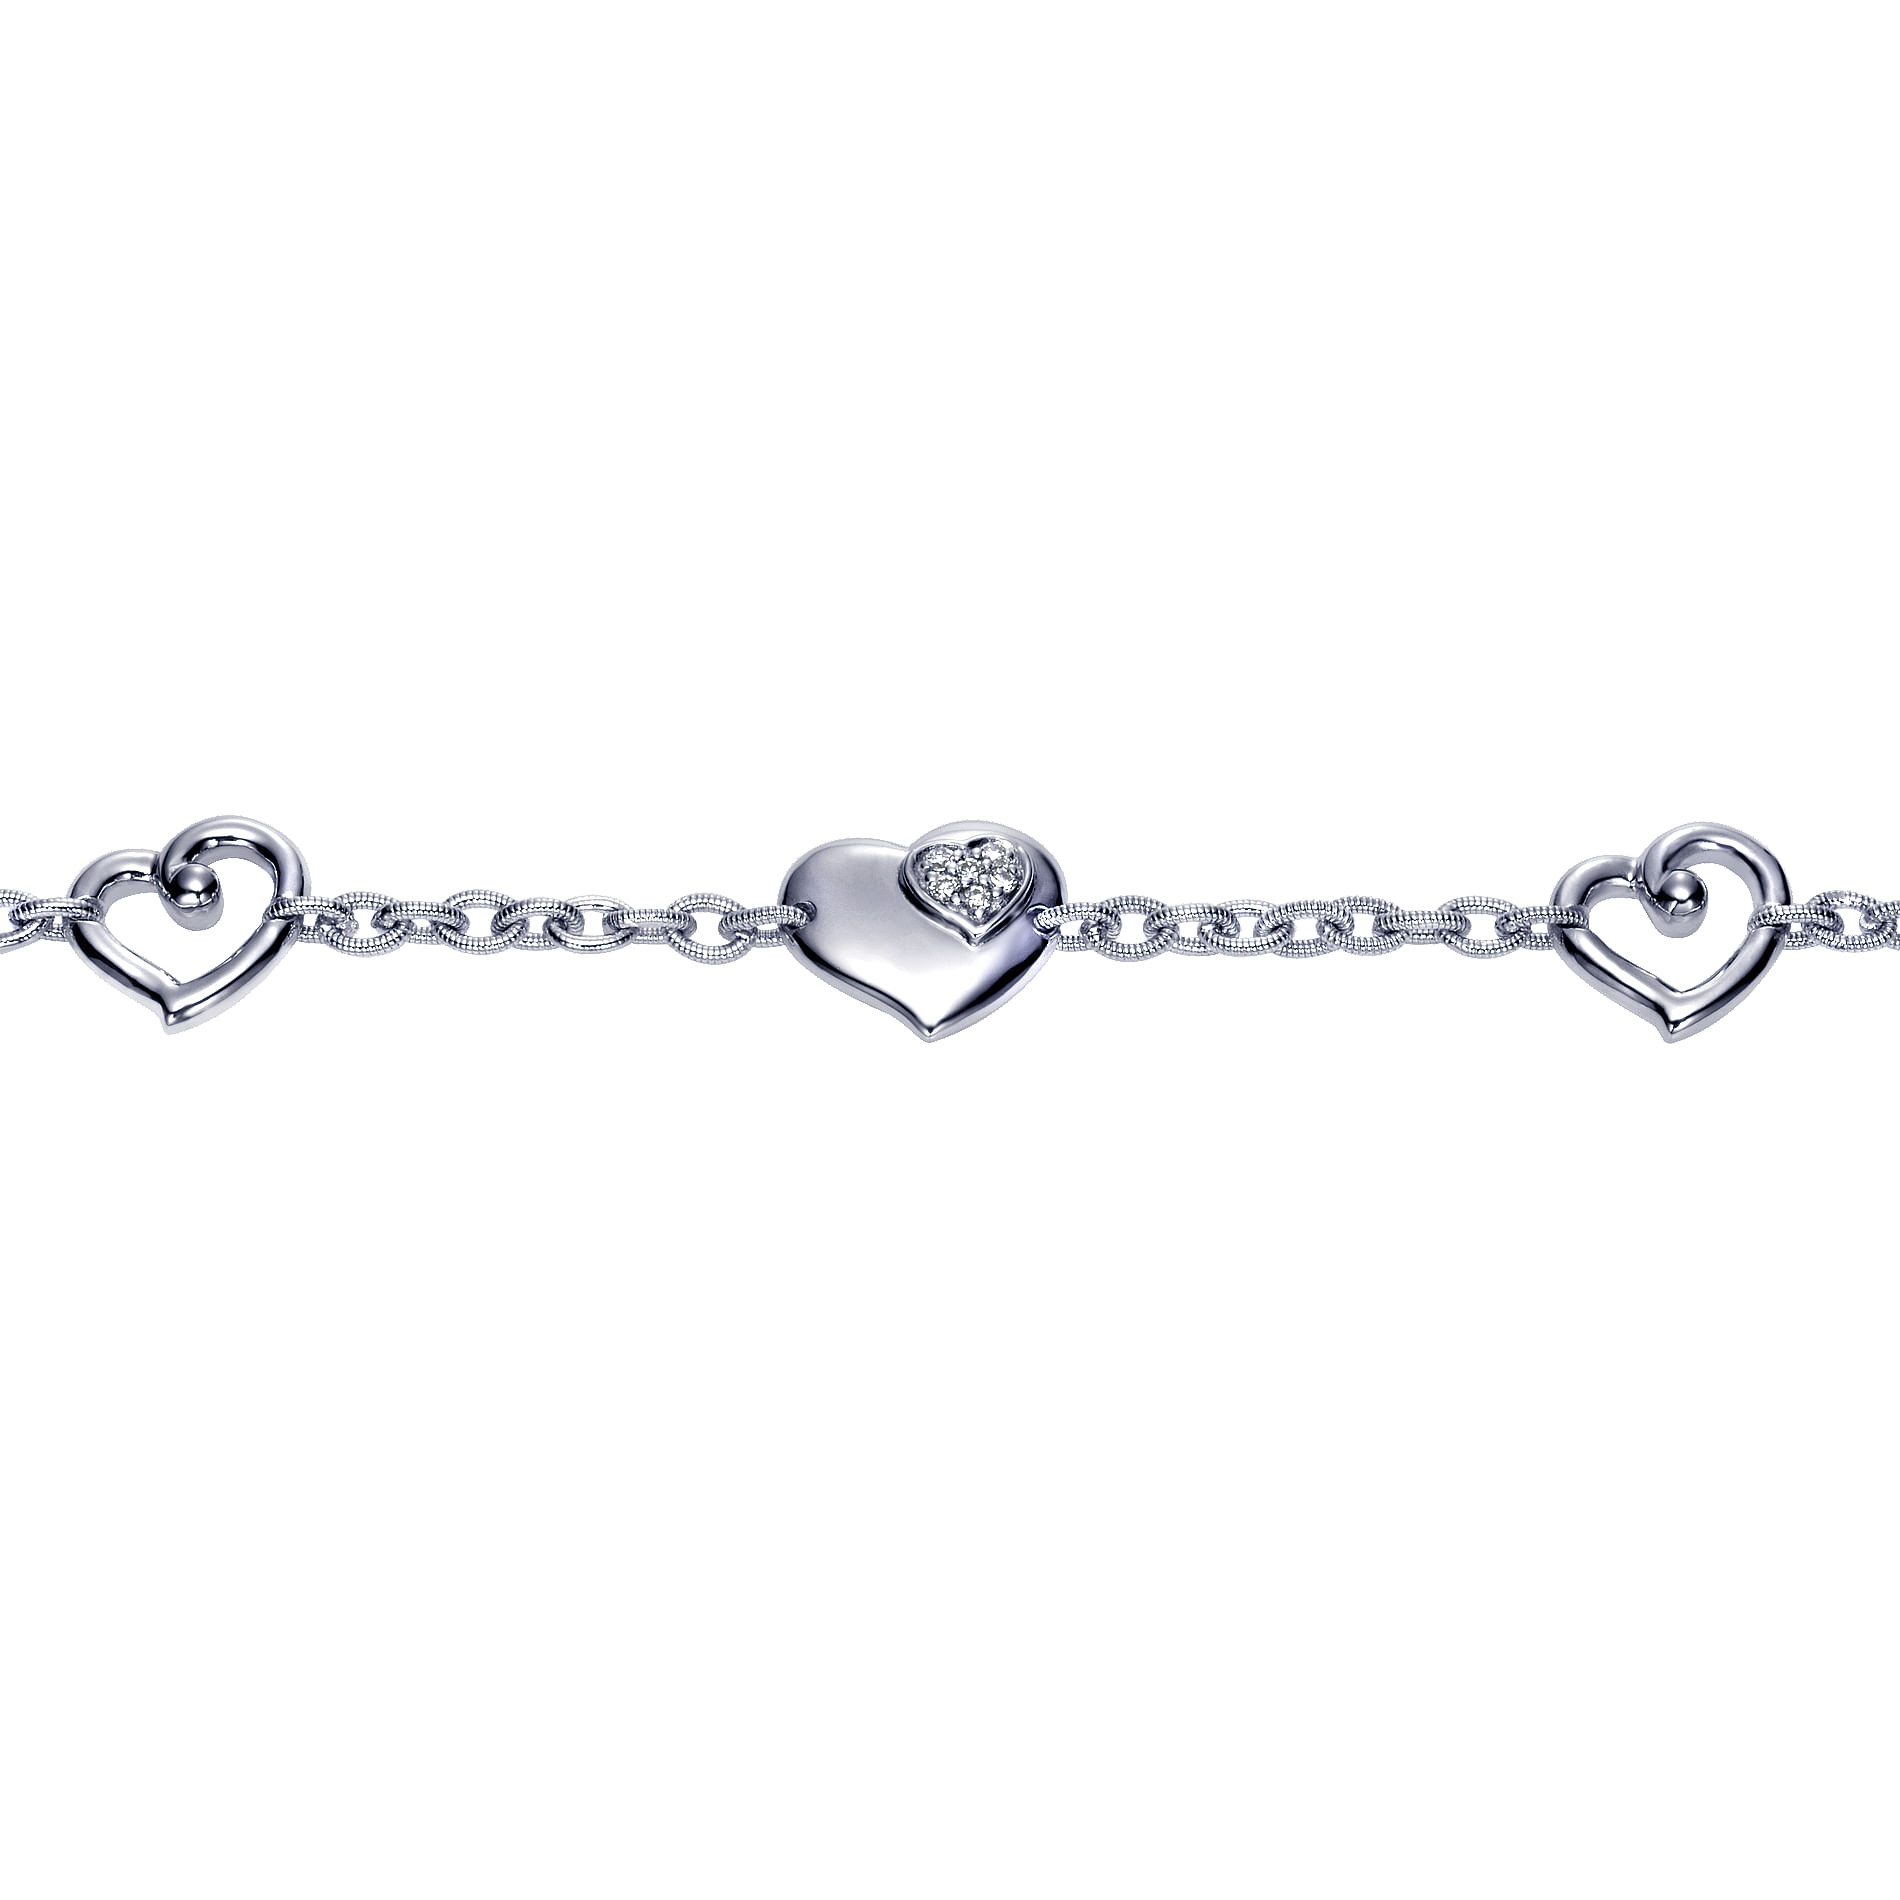 925 Sterling Silver Heart Chain Bracelet with White Sapphire Accent